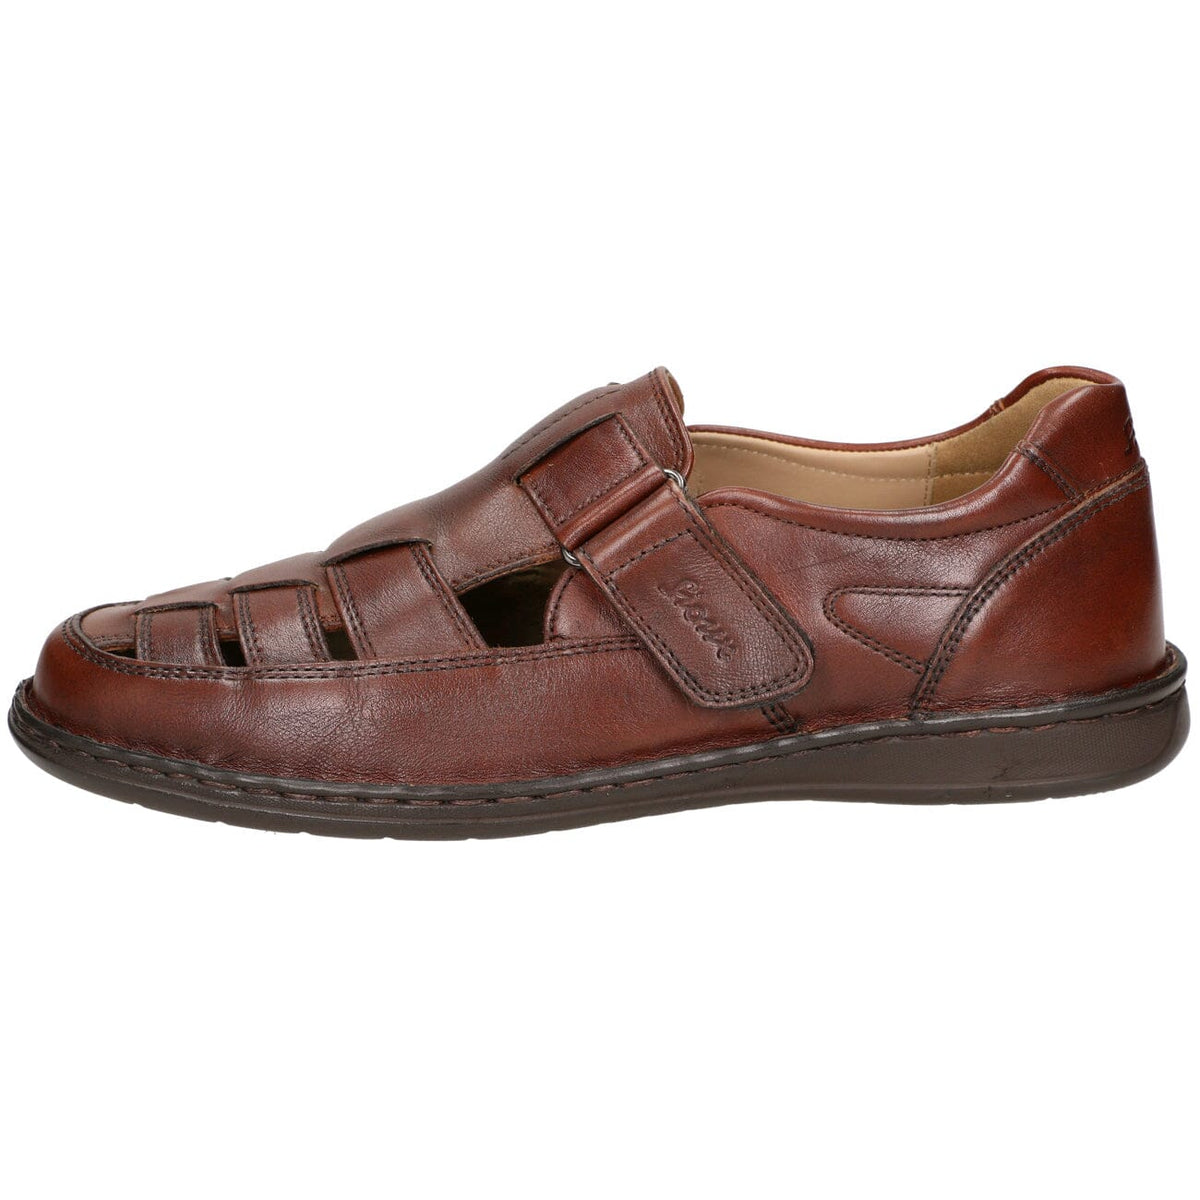 Sioux, Elcino-191, Sandal, Leather, Setter Sandals Sioux 